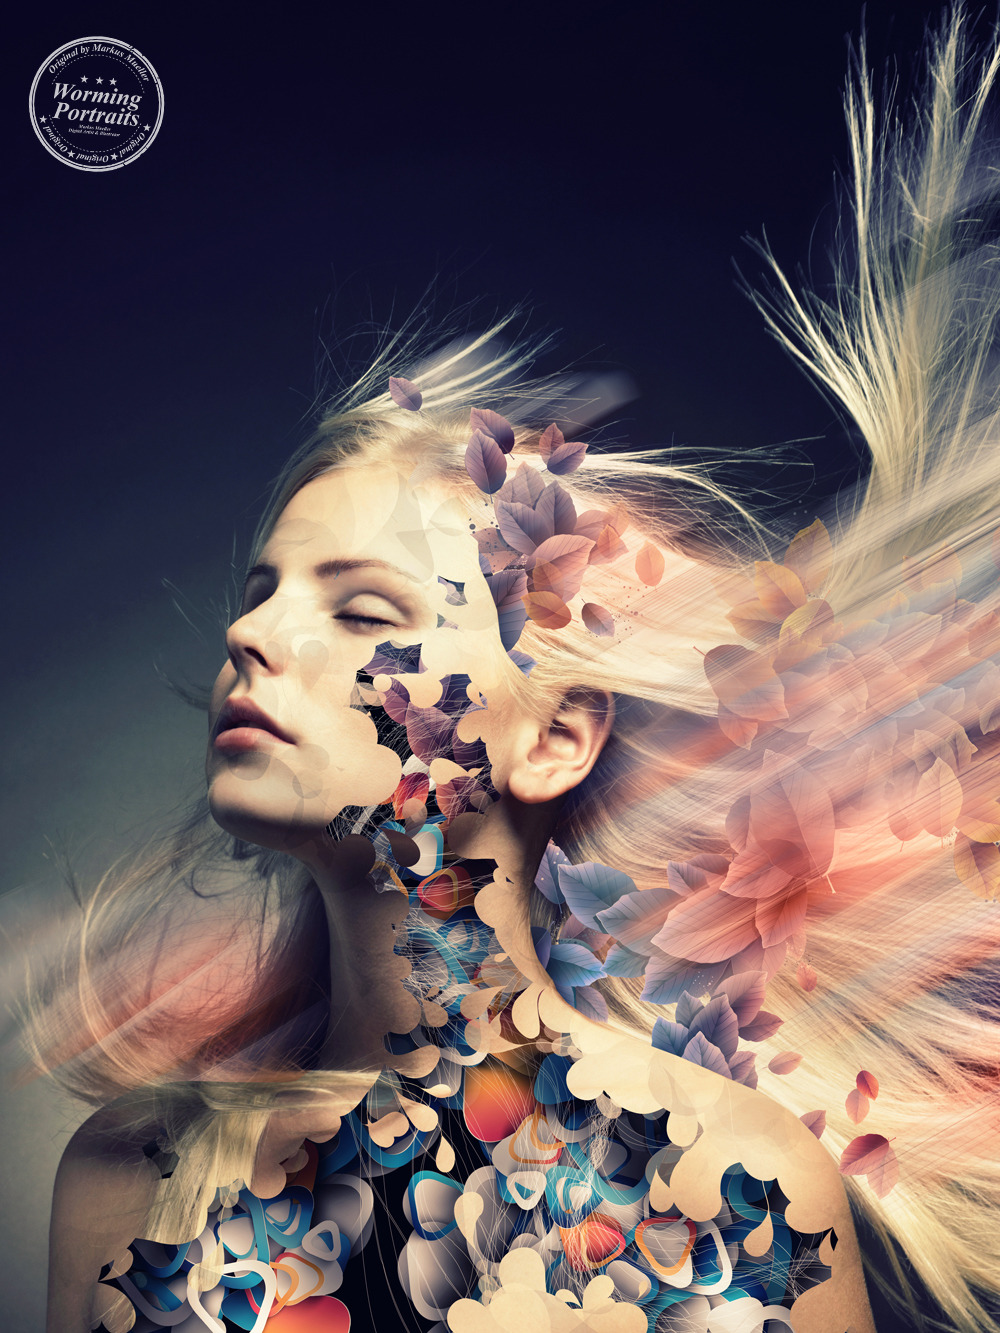 Digital art selected for the Daily Inspiration #1521